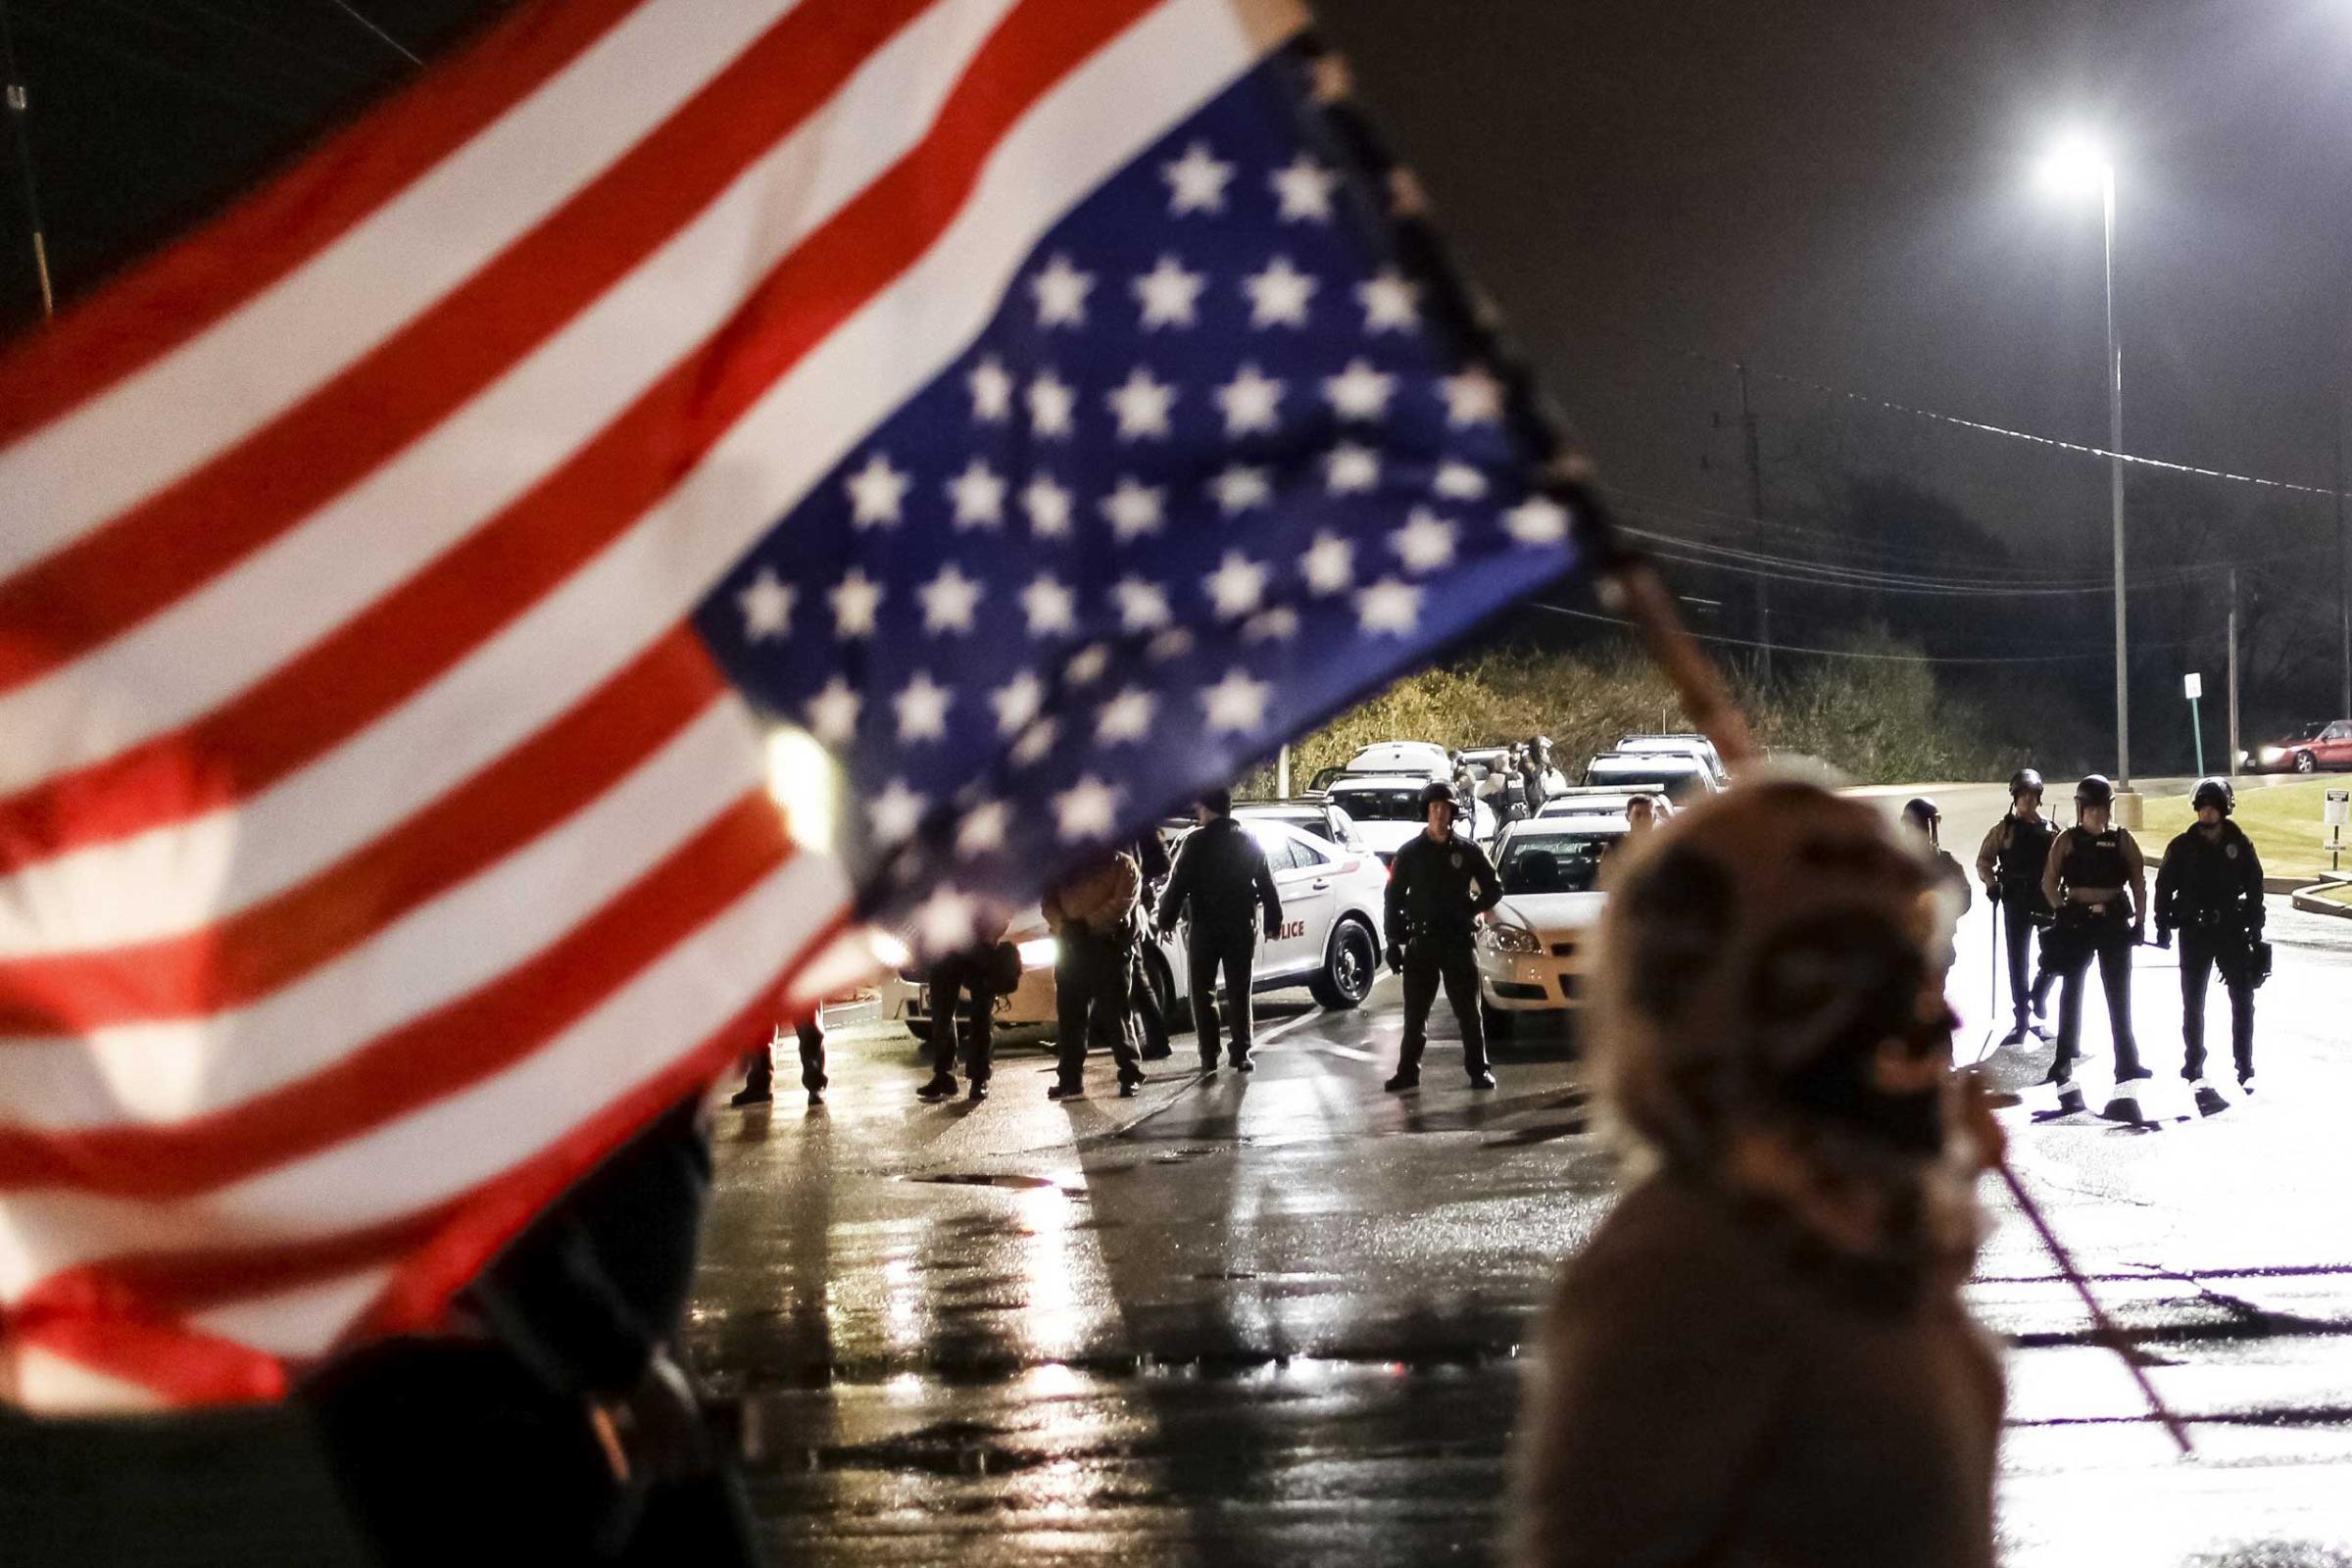 Police watch as a protester with an upside-down American flag marches along West Florissant Avenue in Ferguson, Mo.